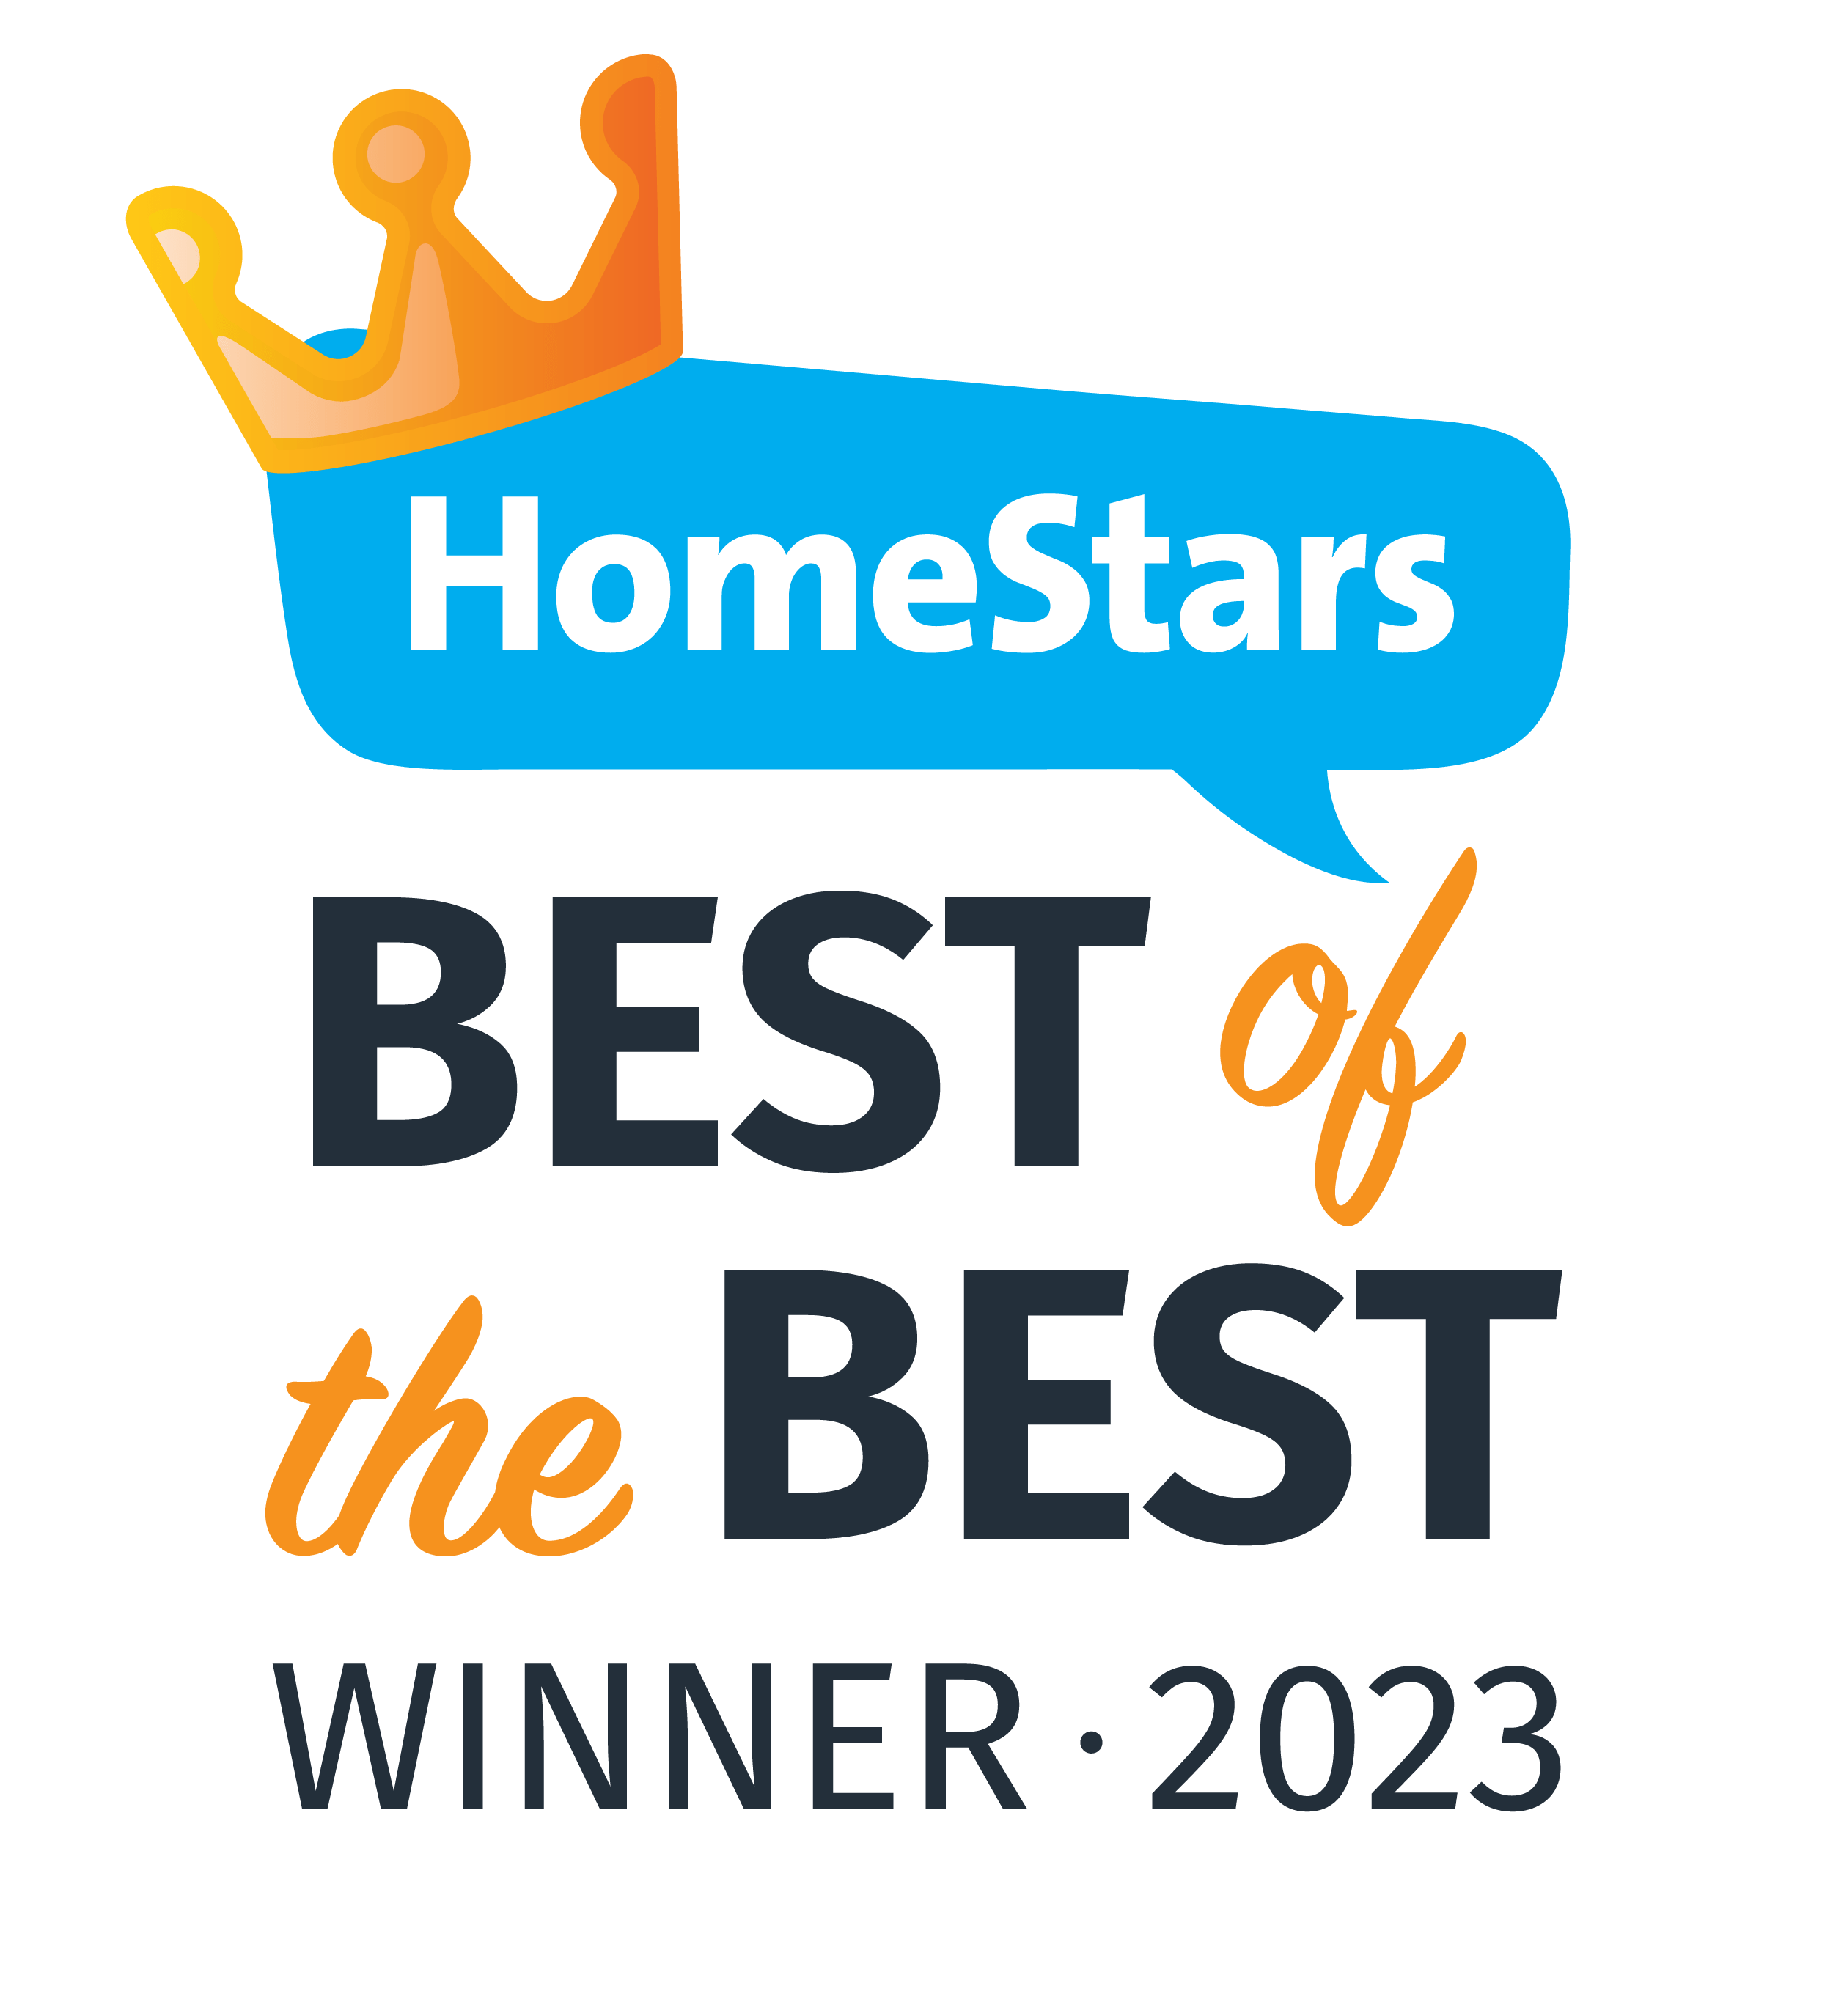 Homestars Best of the best winner -2023 for our Toronto Painting Services.